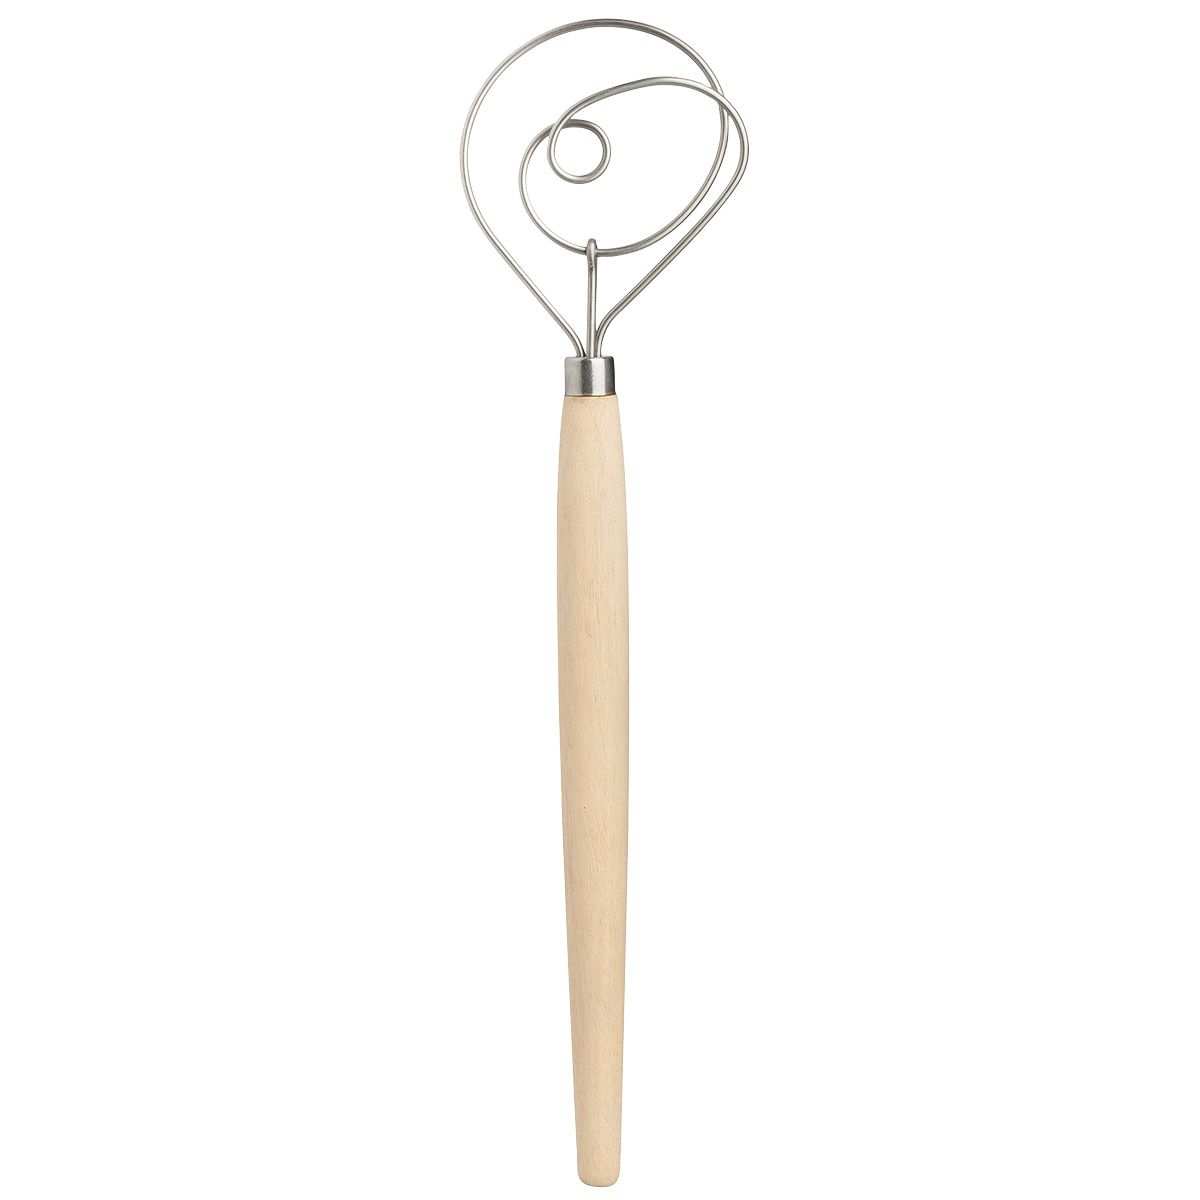 The Danish Dough Whisk Is the Best Tool for Making Bread Dough and